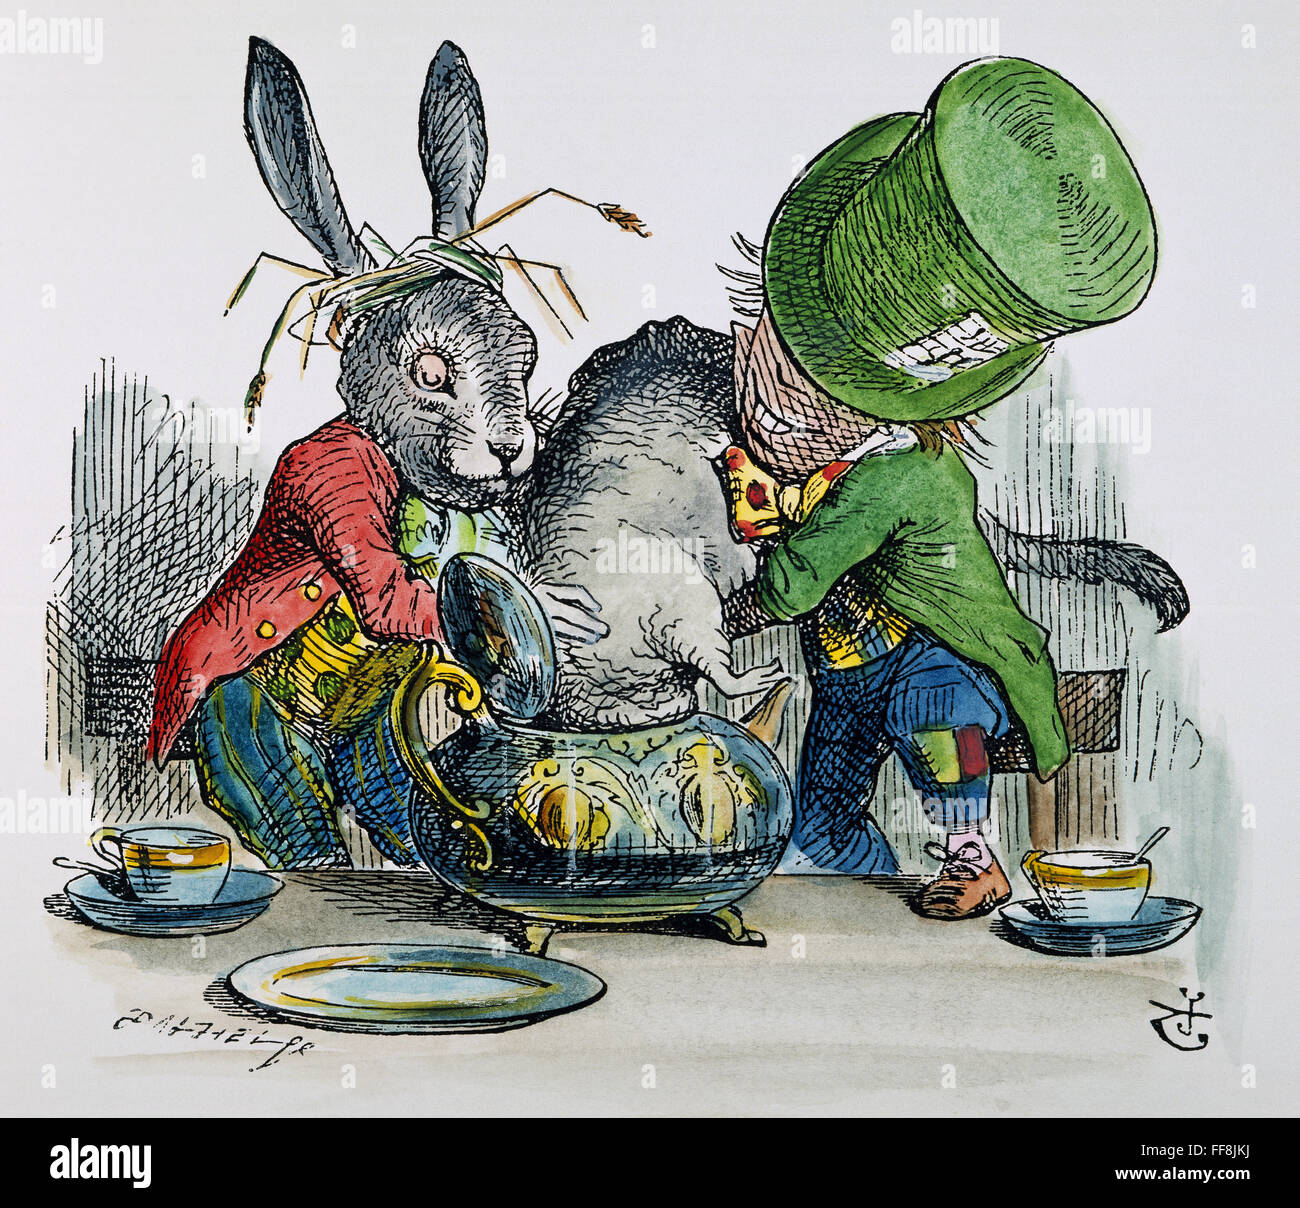 CARROLL: ALICE, 1865. /nThe March Hare and the Mad Hatter trying to put the Dormouse in the teapot: after the design by Sir John Tenniel for the first edition of Lewis Carroll's 'Alice's Adventures in Wonderland'. Stock Photo